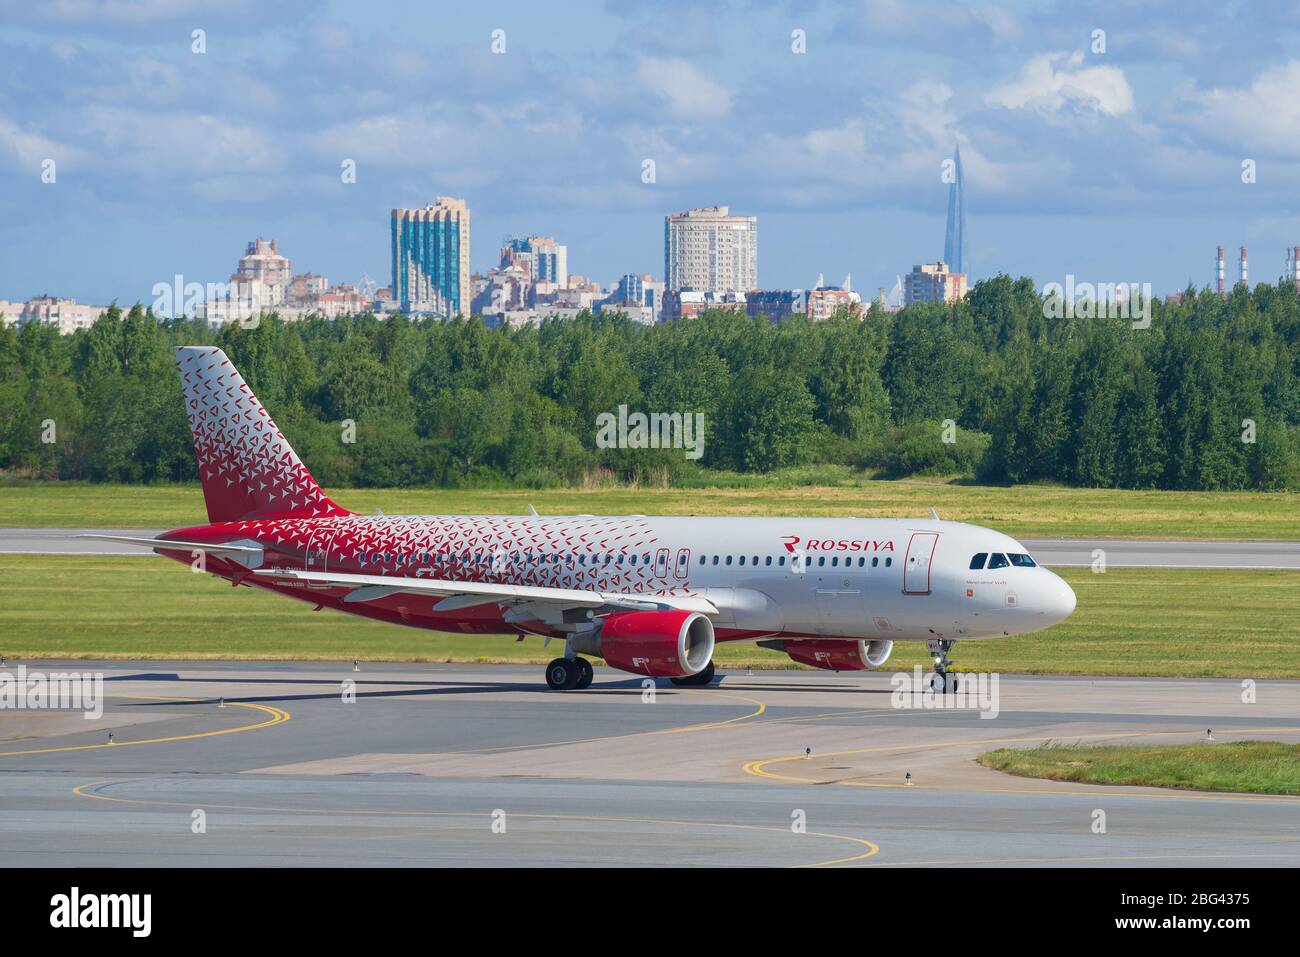 ST. PETERSBURG, RUSSIA - JUNE 20, 2018: Airbus A320-214 (VP-BWH) of the Rossiya Airlines on the taxiway of Pulkovo Airport Stock Photo